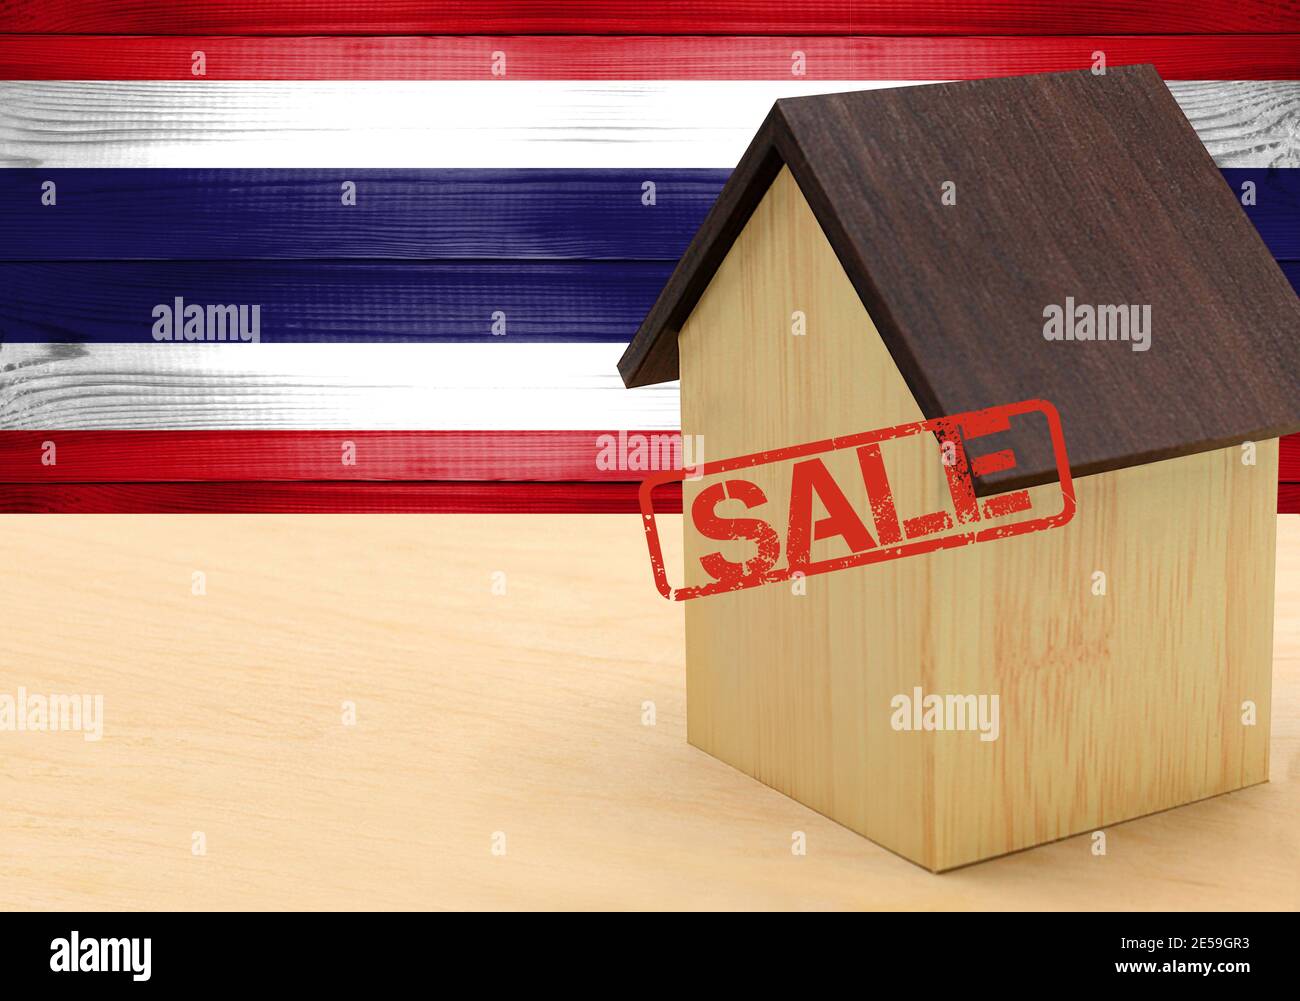 The concept sale of apartments, of real estate mortgages, citizenship and accommodation, as well as investment in a future home. Costa Rica flag on wo Stock Photo